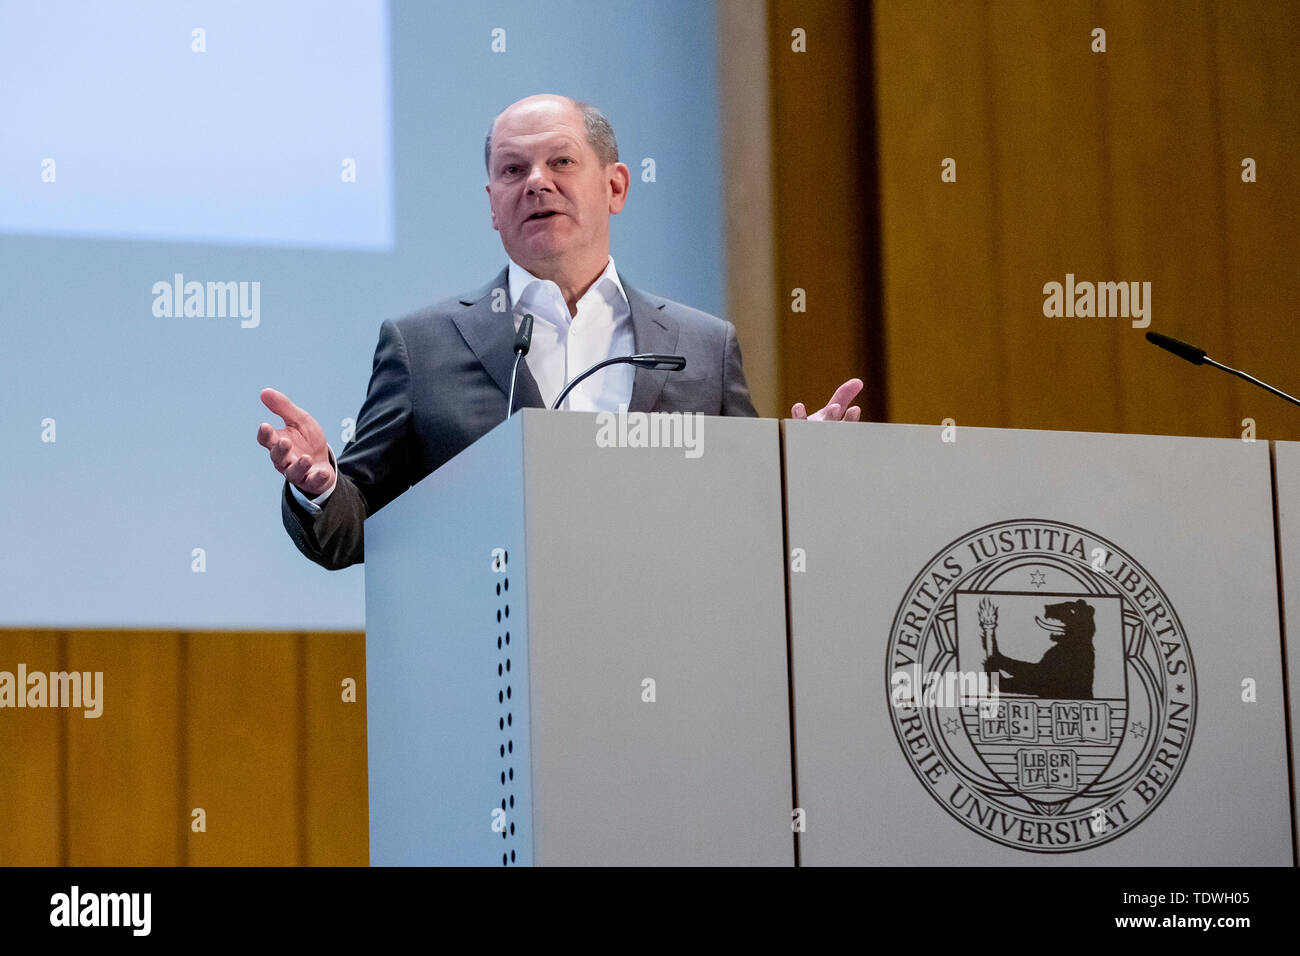 Berlin, Germany. 19th June, 2019. Olaf Scholz (SPD), Federal Minister of Finance, speaks at the discussion event at Freie Universität Berlin. In the lecture series 'Financial Crises and Monetary Systems', the Vice-Chancellor gives a lecture on the lessons learned from the financial crisis of 2008 and its subsequent years and engages in a discussion with the students. Credit: Christoph Soeder/dpa/Alamy Live News Stock Photo